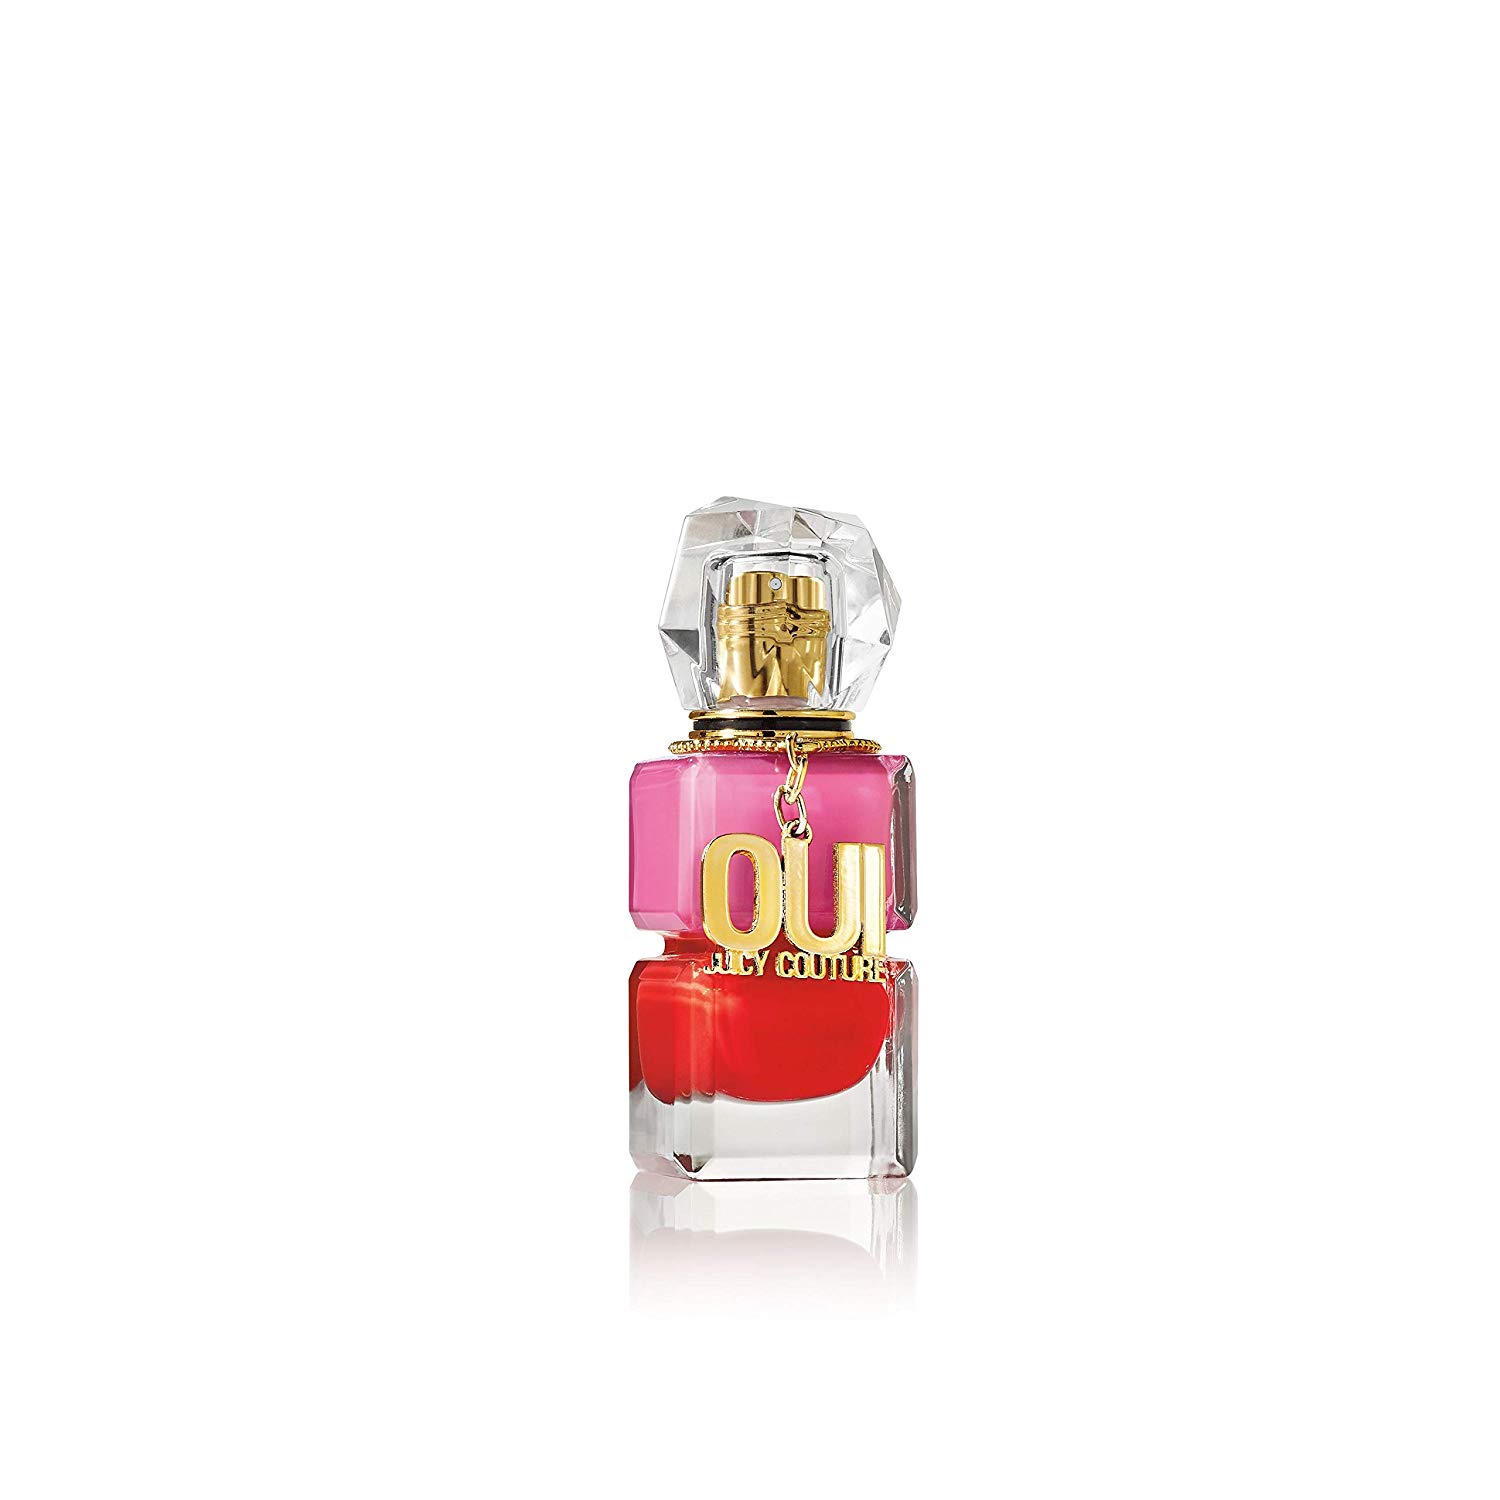 Perfume Juicy Couture para mujer solo 29€